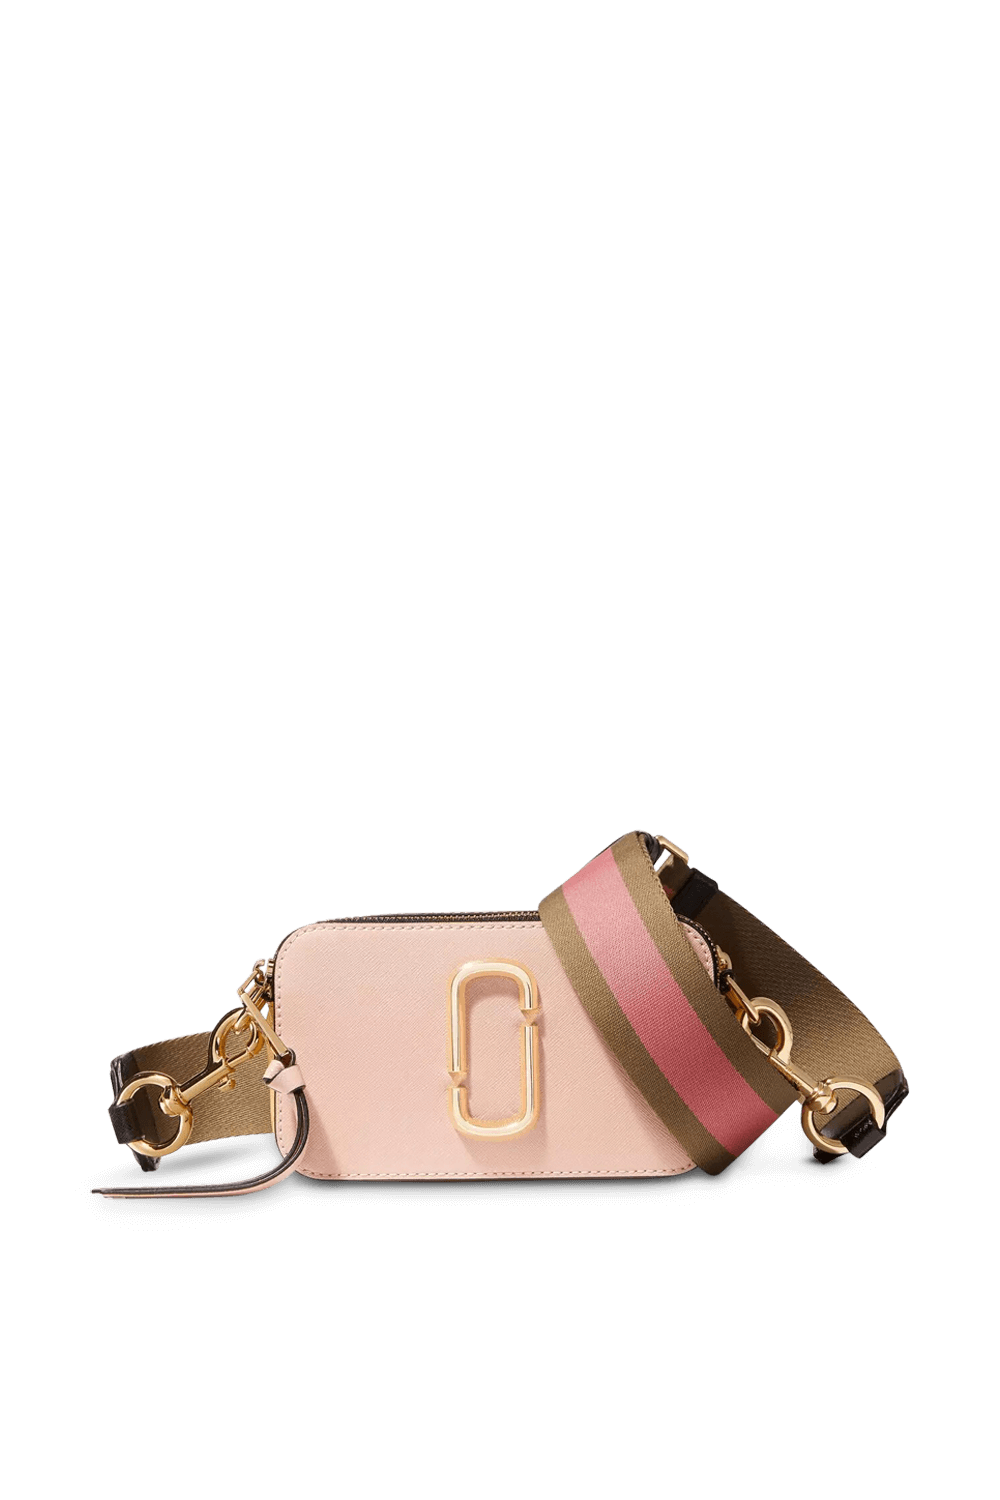 The Snapshot in Pink MARC JACOBS